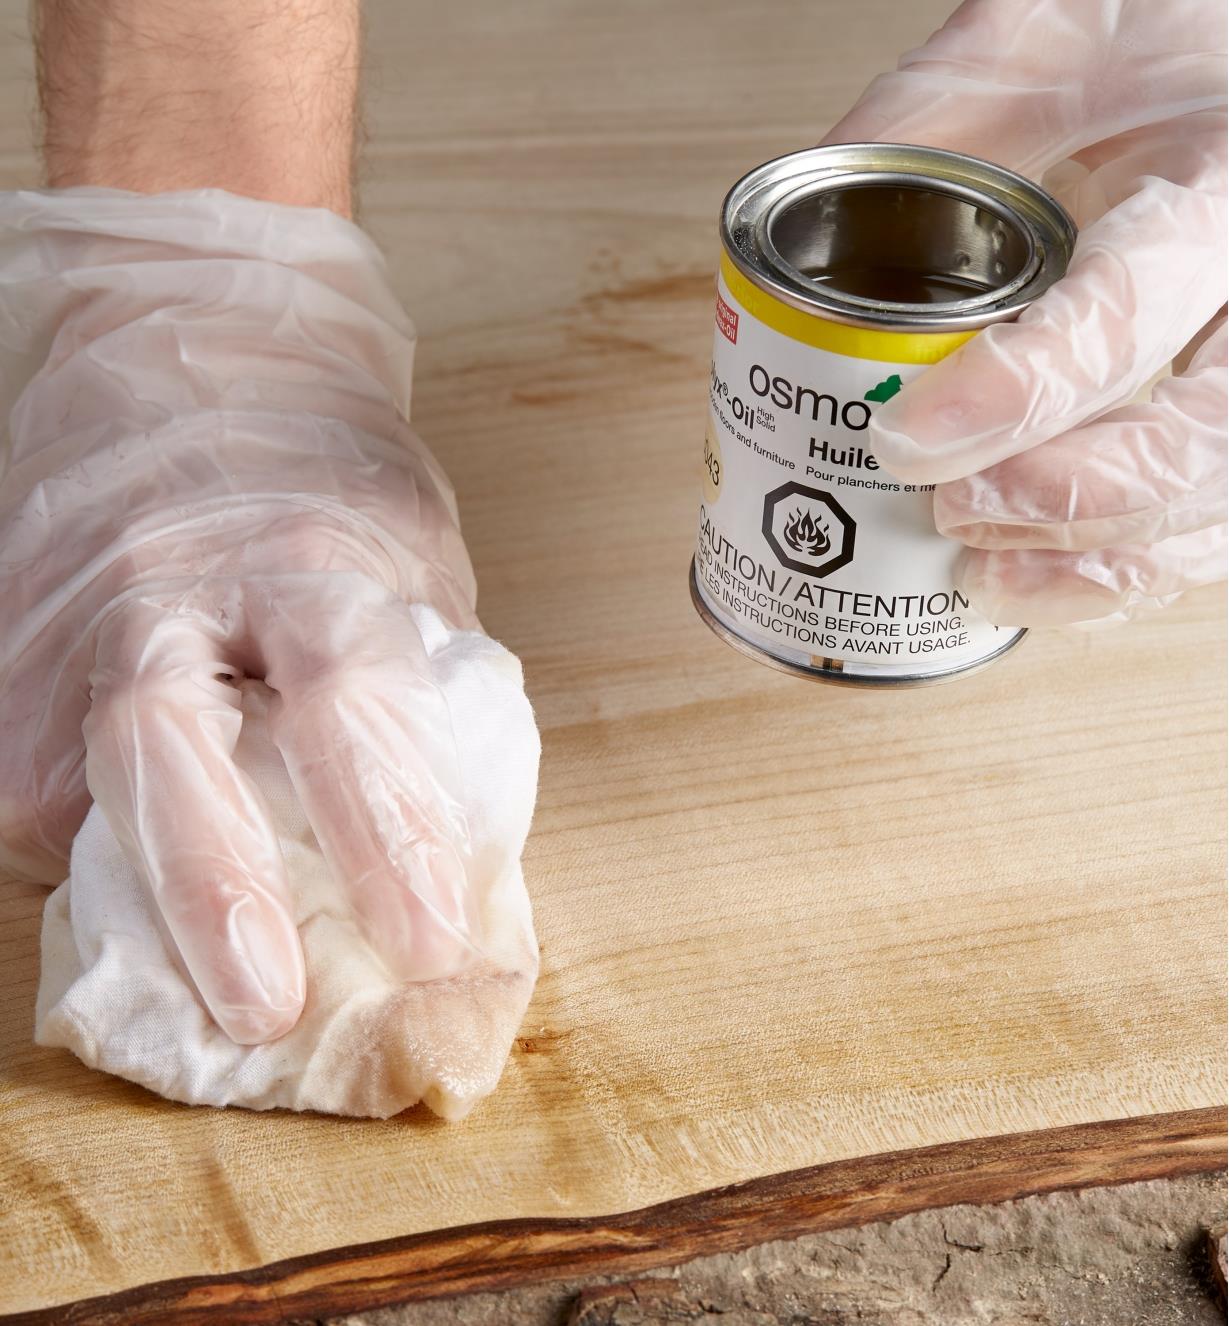 Wiping Osmo Polyx hard wax oil onto wood using a cloth